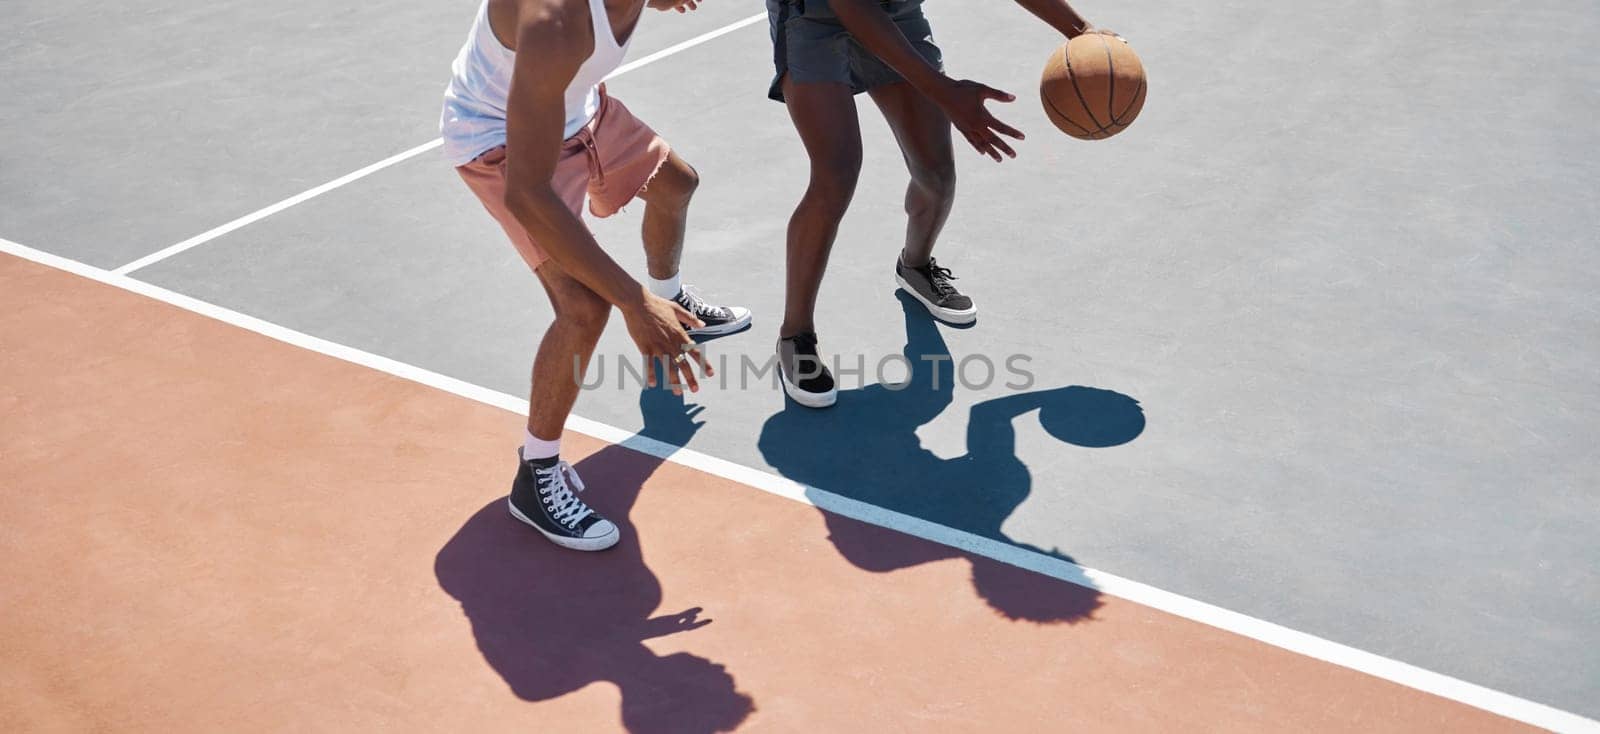 Sports, fitness and basketball training by men at basketball court for practice, exercise and stamina cardio. Sport, basketball player and friends playing competitive game outdoor, energy and workout by YuriArcurs